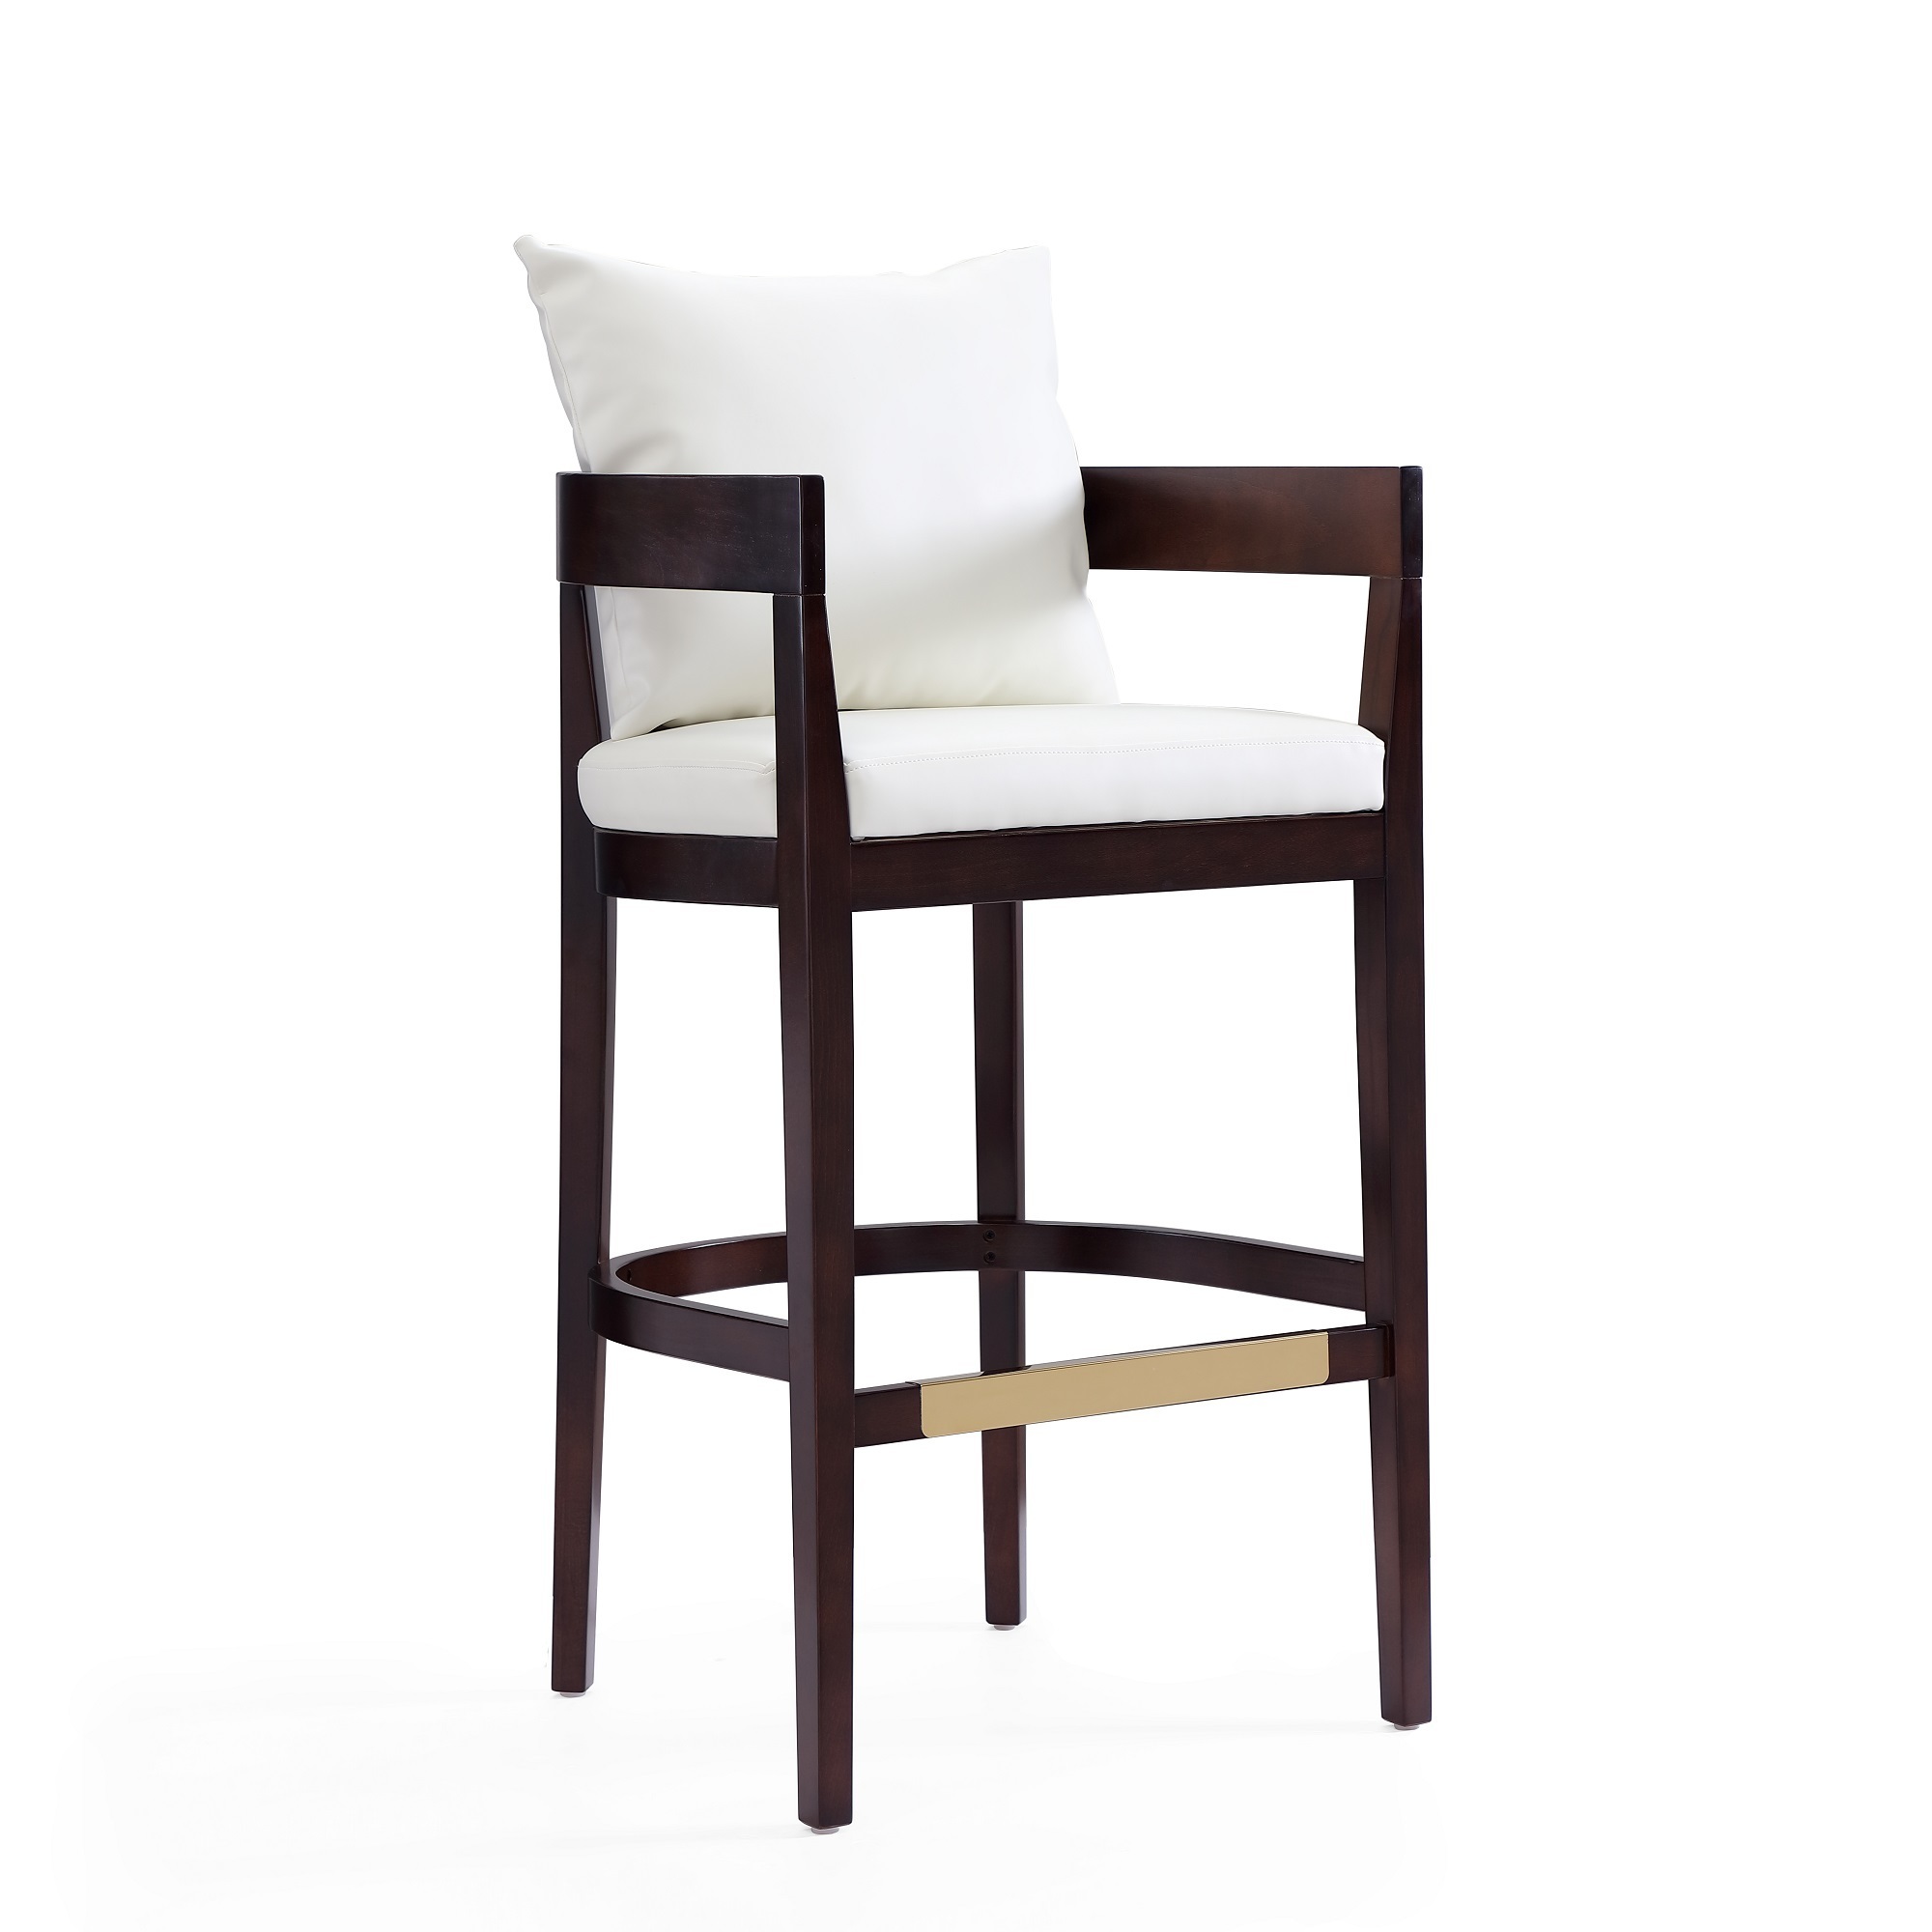 Manhattan Comfort, Ritz 38Inch Ivory and Dark Walnut Beech Wood Stool, Primary Color Ivory, Included (qty.) 1 Model BS013